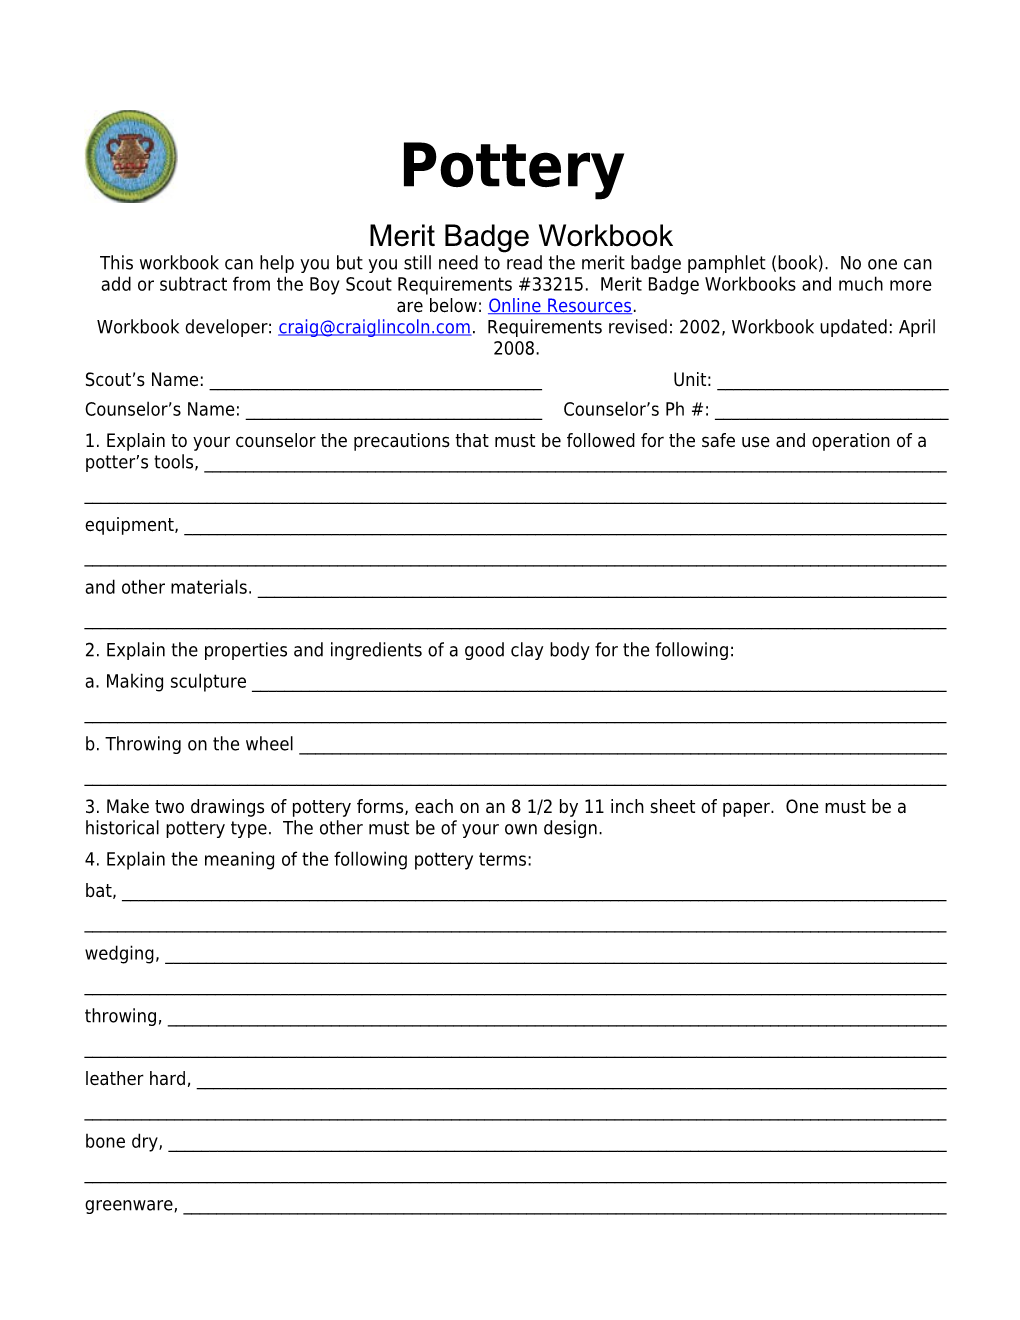 Pottery P. 1 Merit Badge Workbook Scout's Name: ______